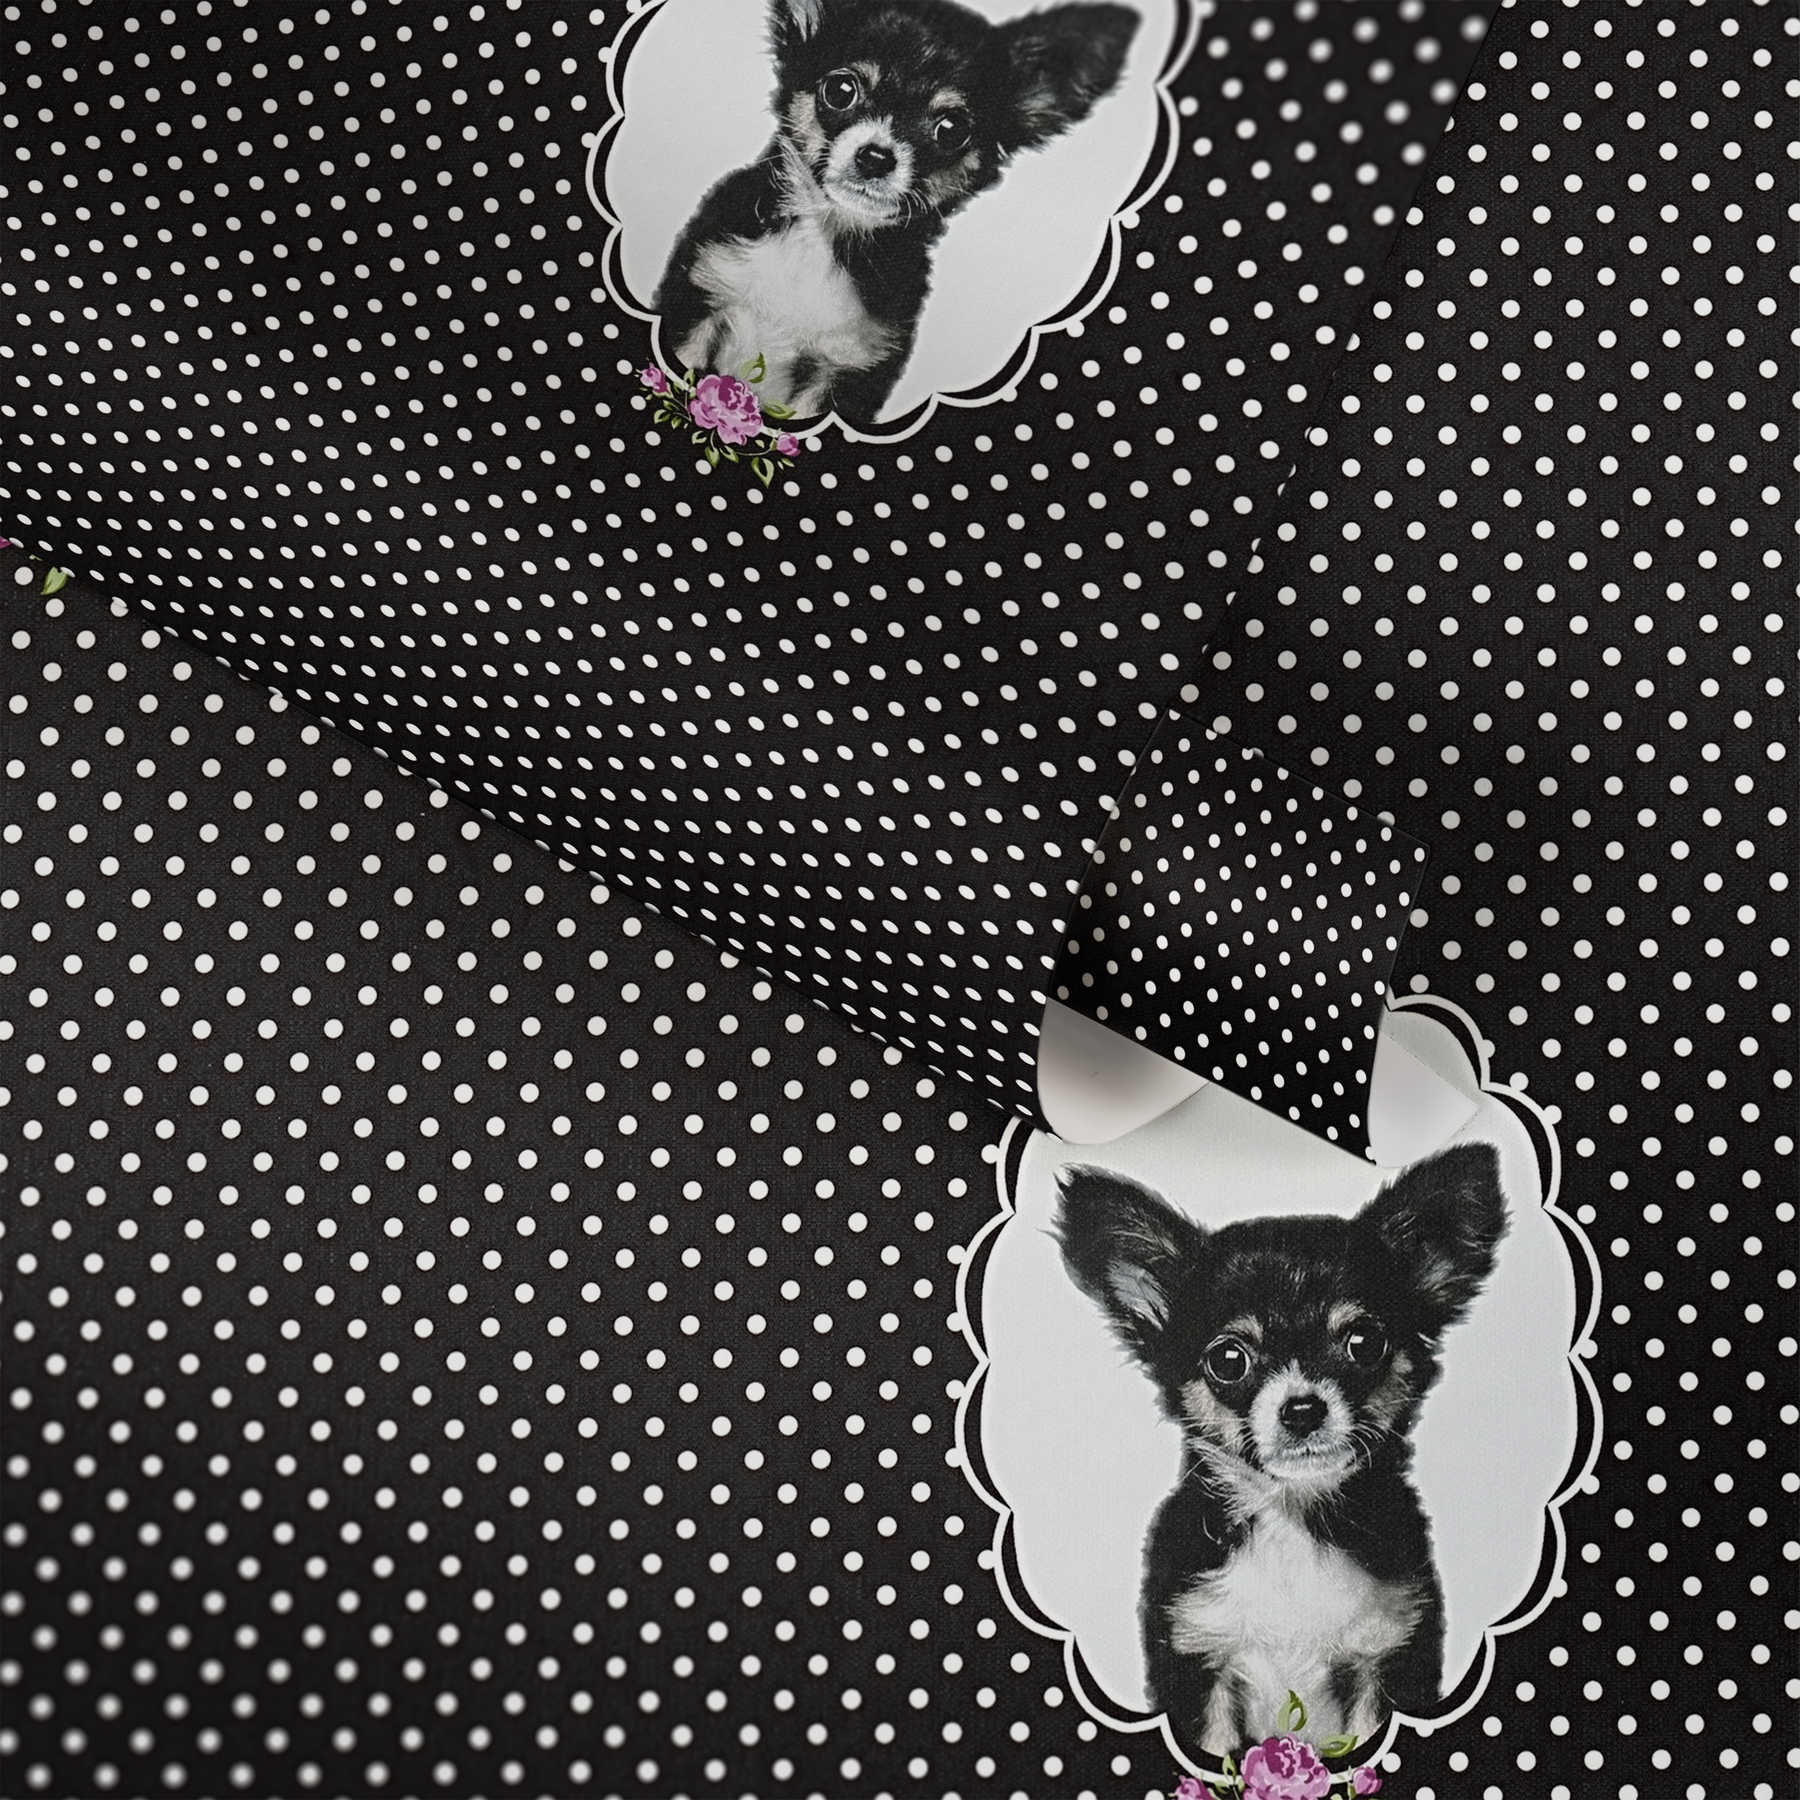             Wallpaper with dots & puppies for Nursery - Black
        